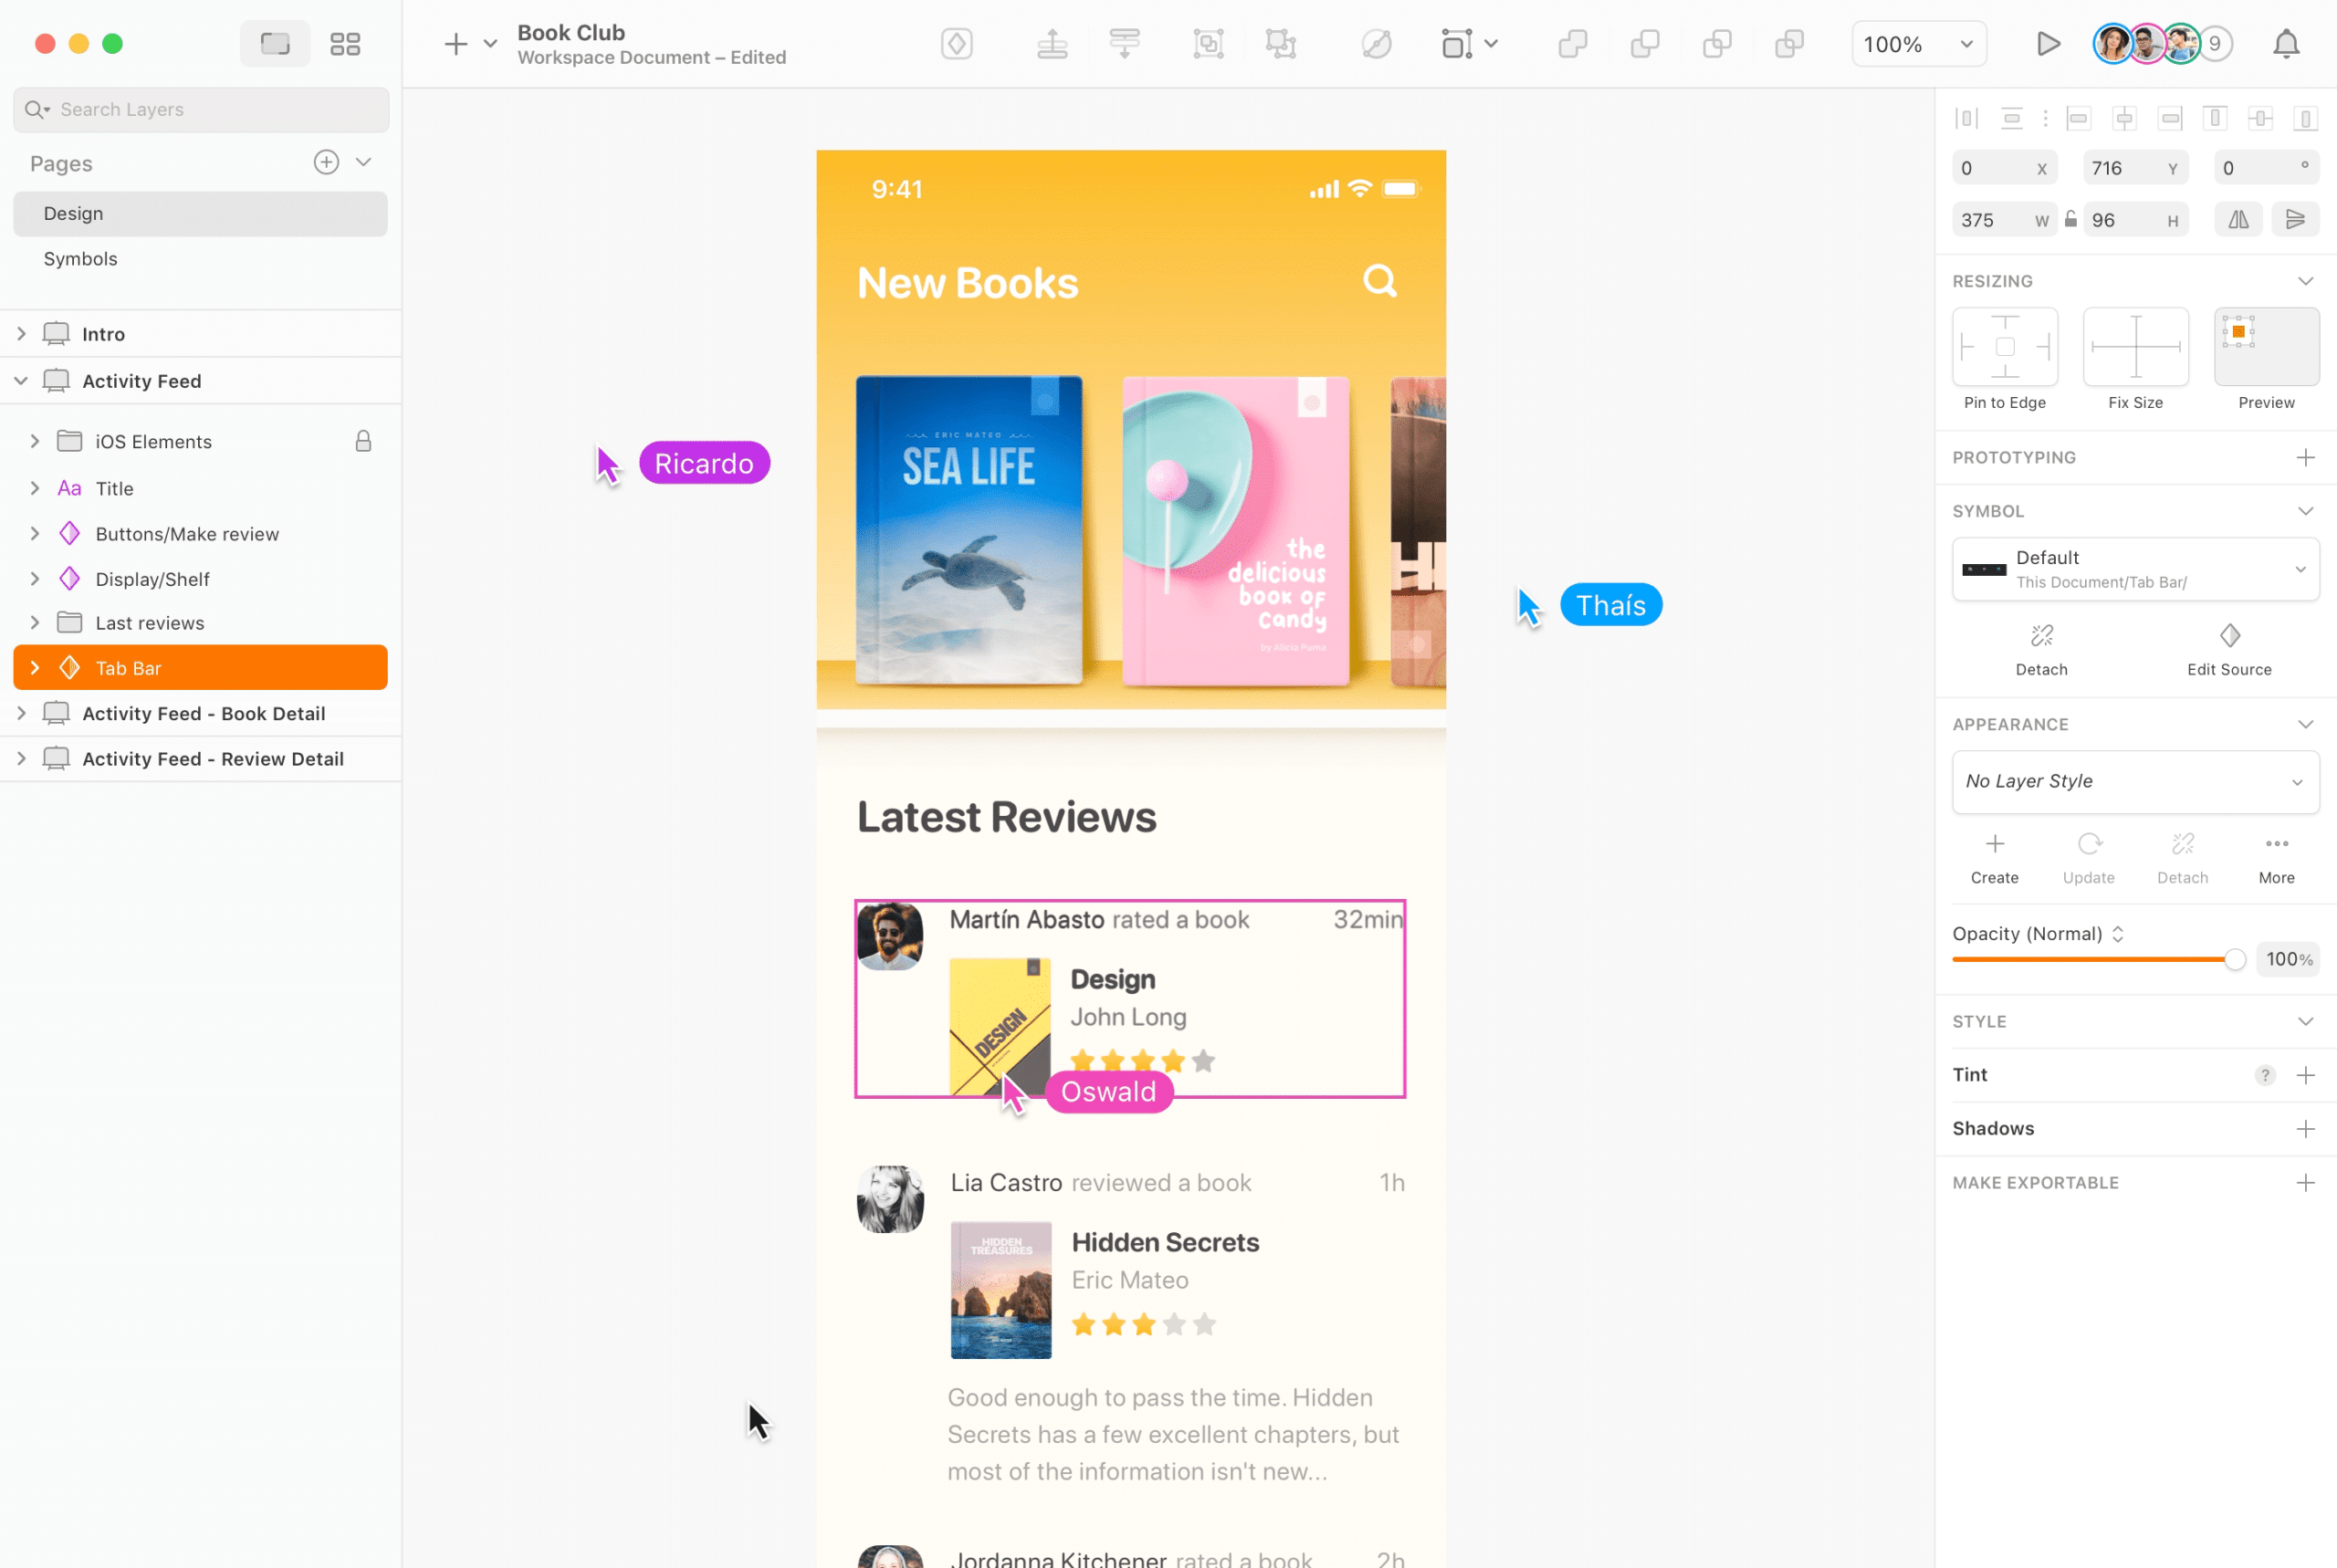 Getting Started Product UXUI Design in Sketch  Sketch Noob to Master  ep1  YouTube